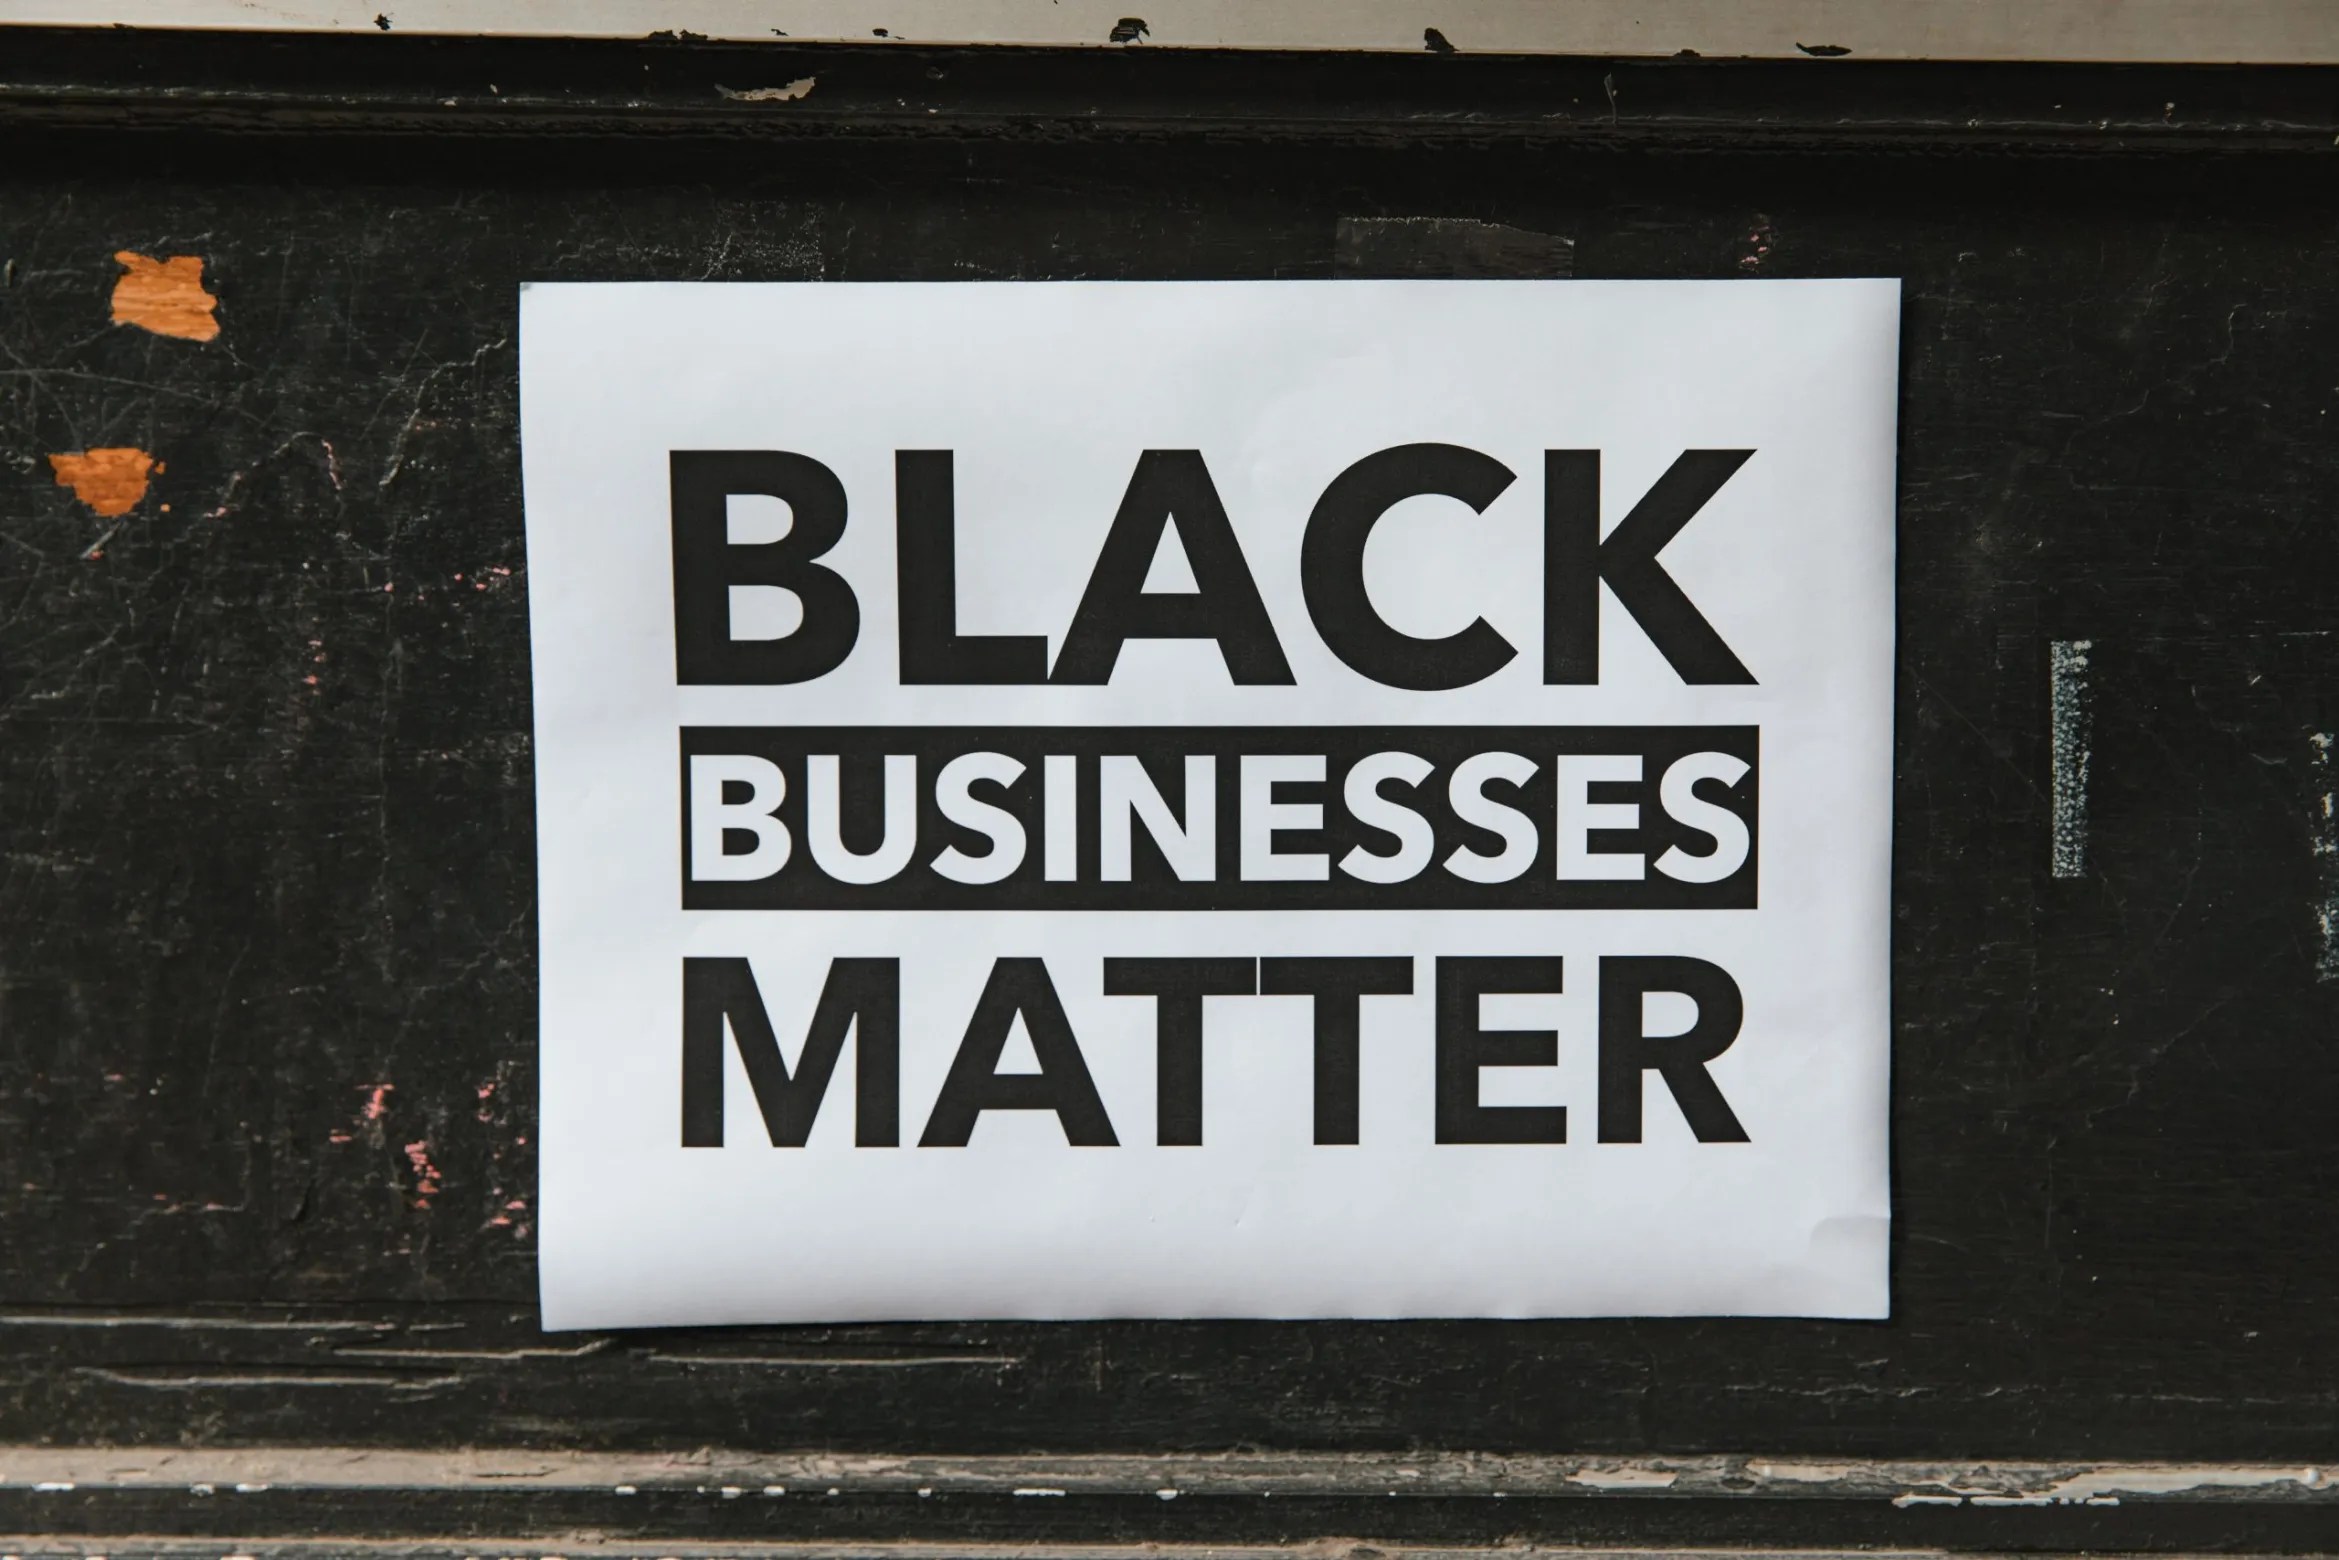 black-entrepreneurs-need-cash.-this-initiative-can-help